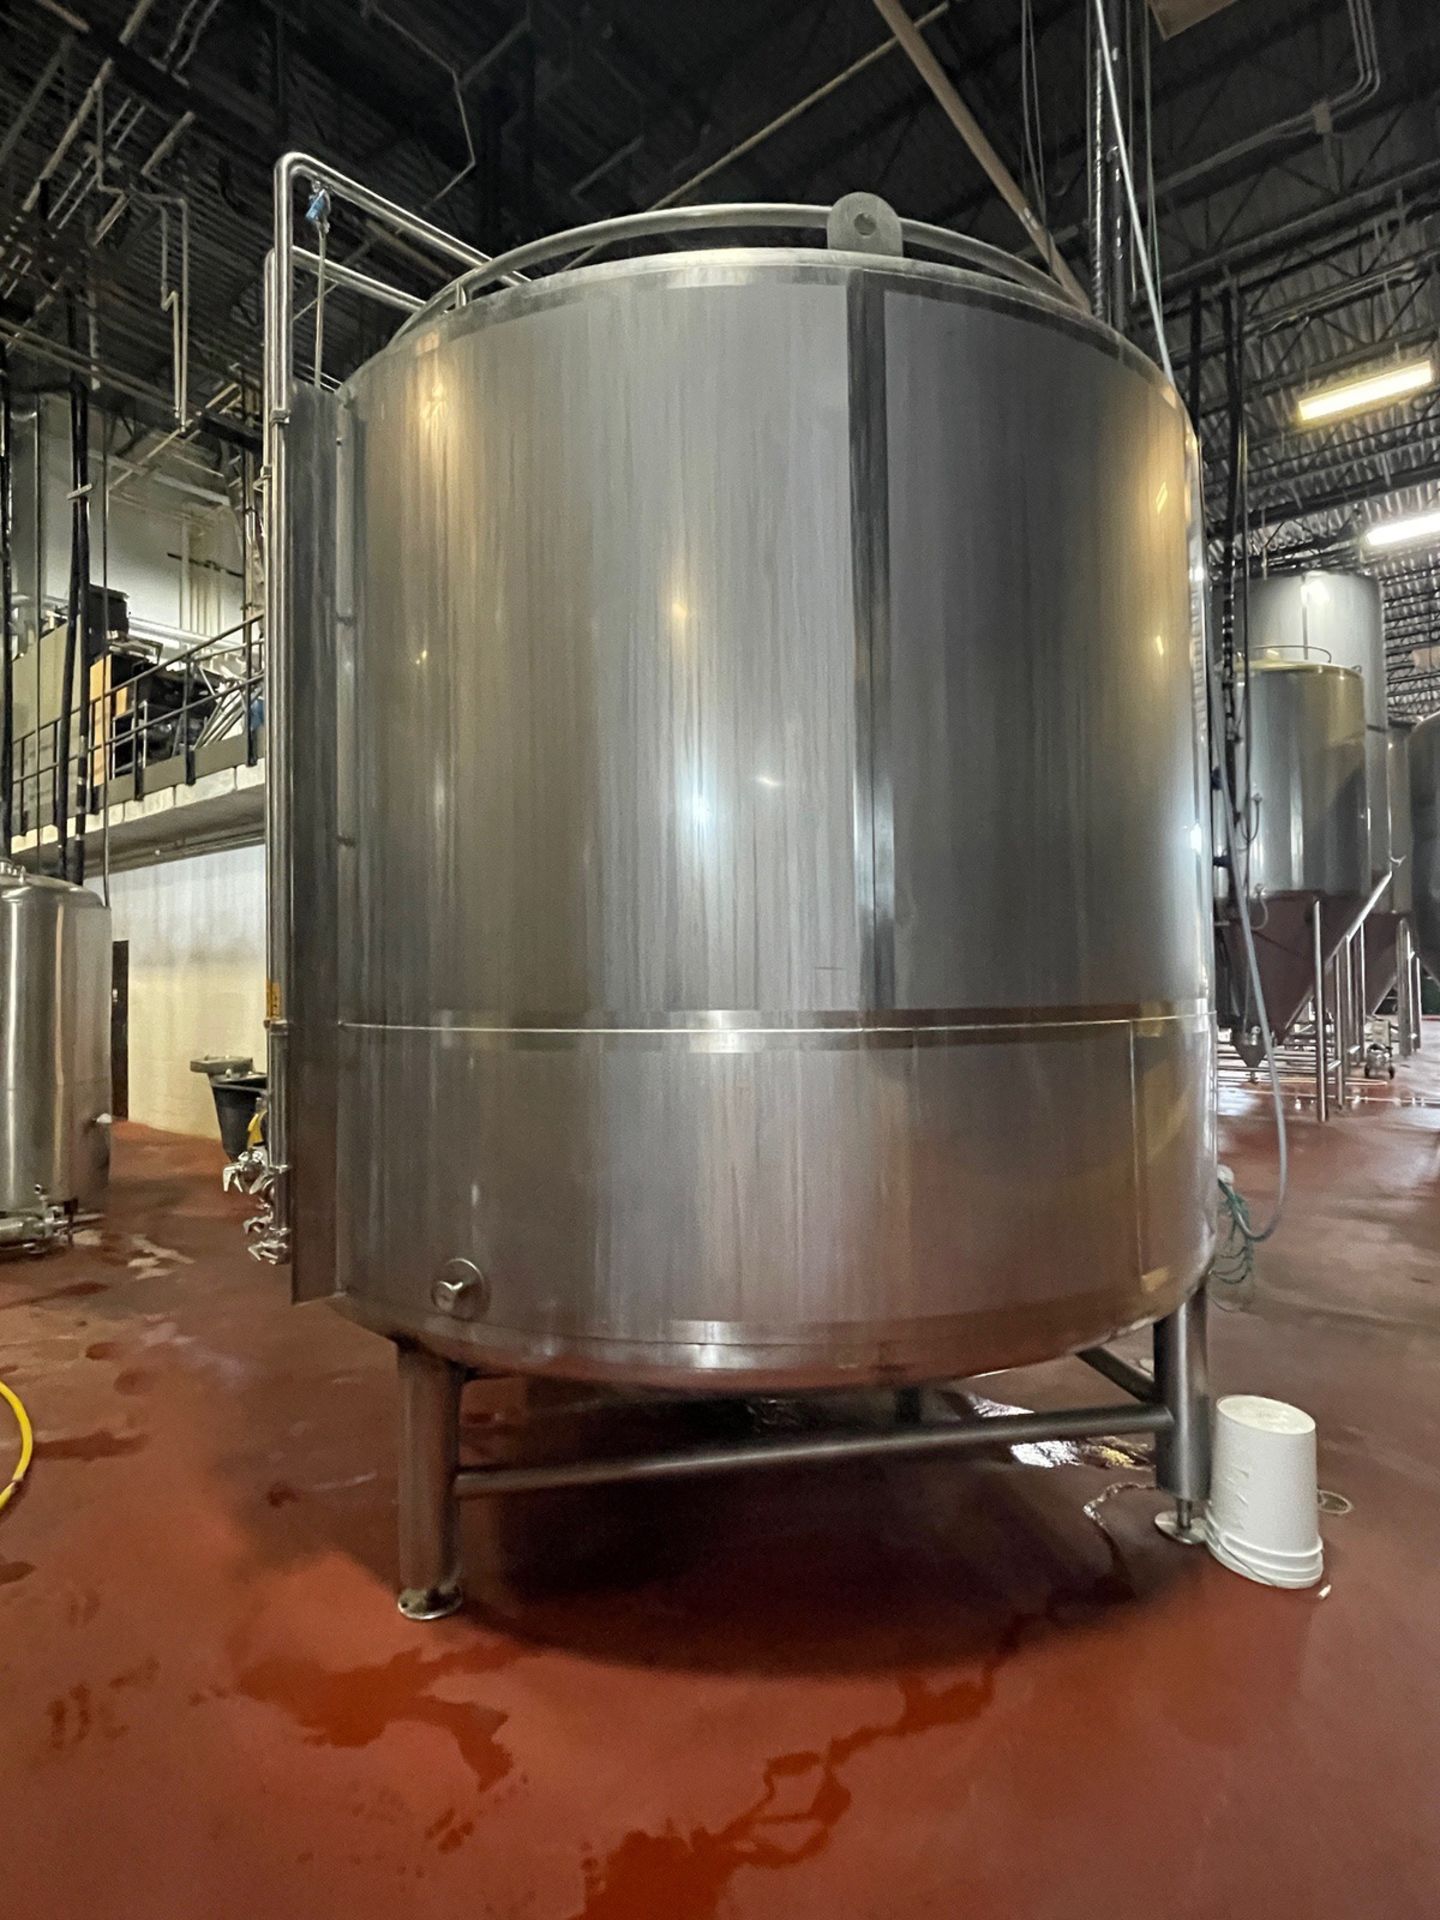 Quality Tank 200 BBL Stainless Steel Holding Tank, Glycol Jacketed, Rounded Bottom, | Rig Fee $3000 - Image 4 of 7